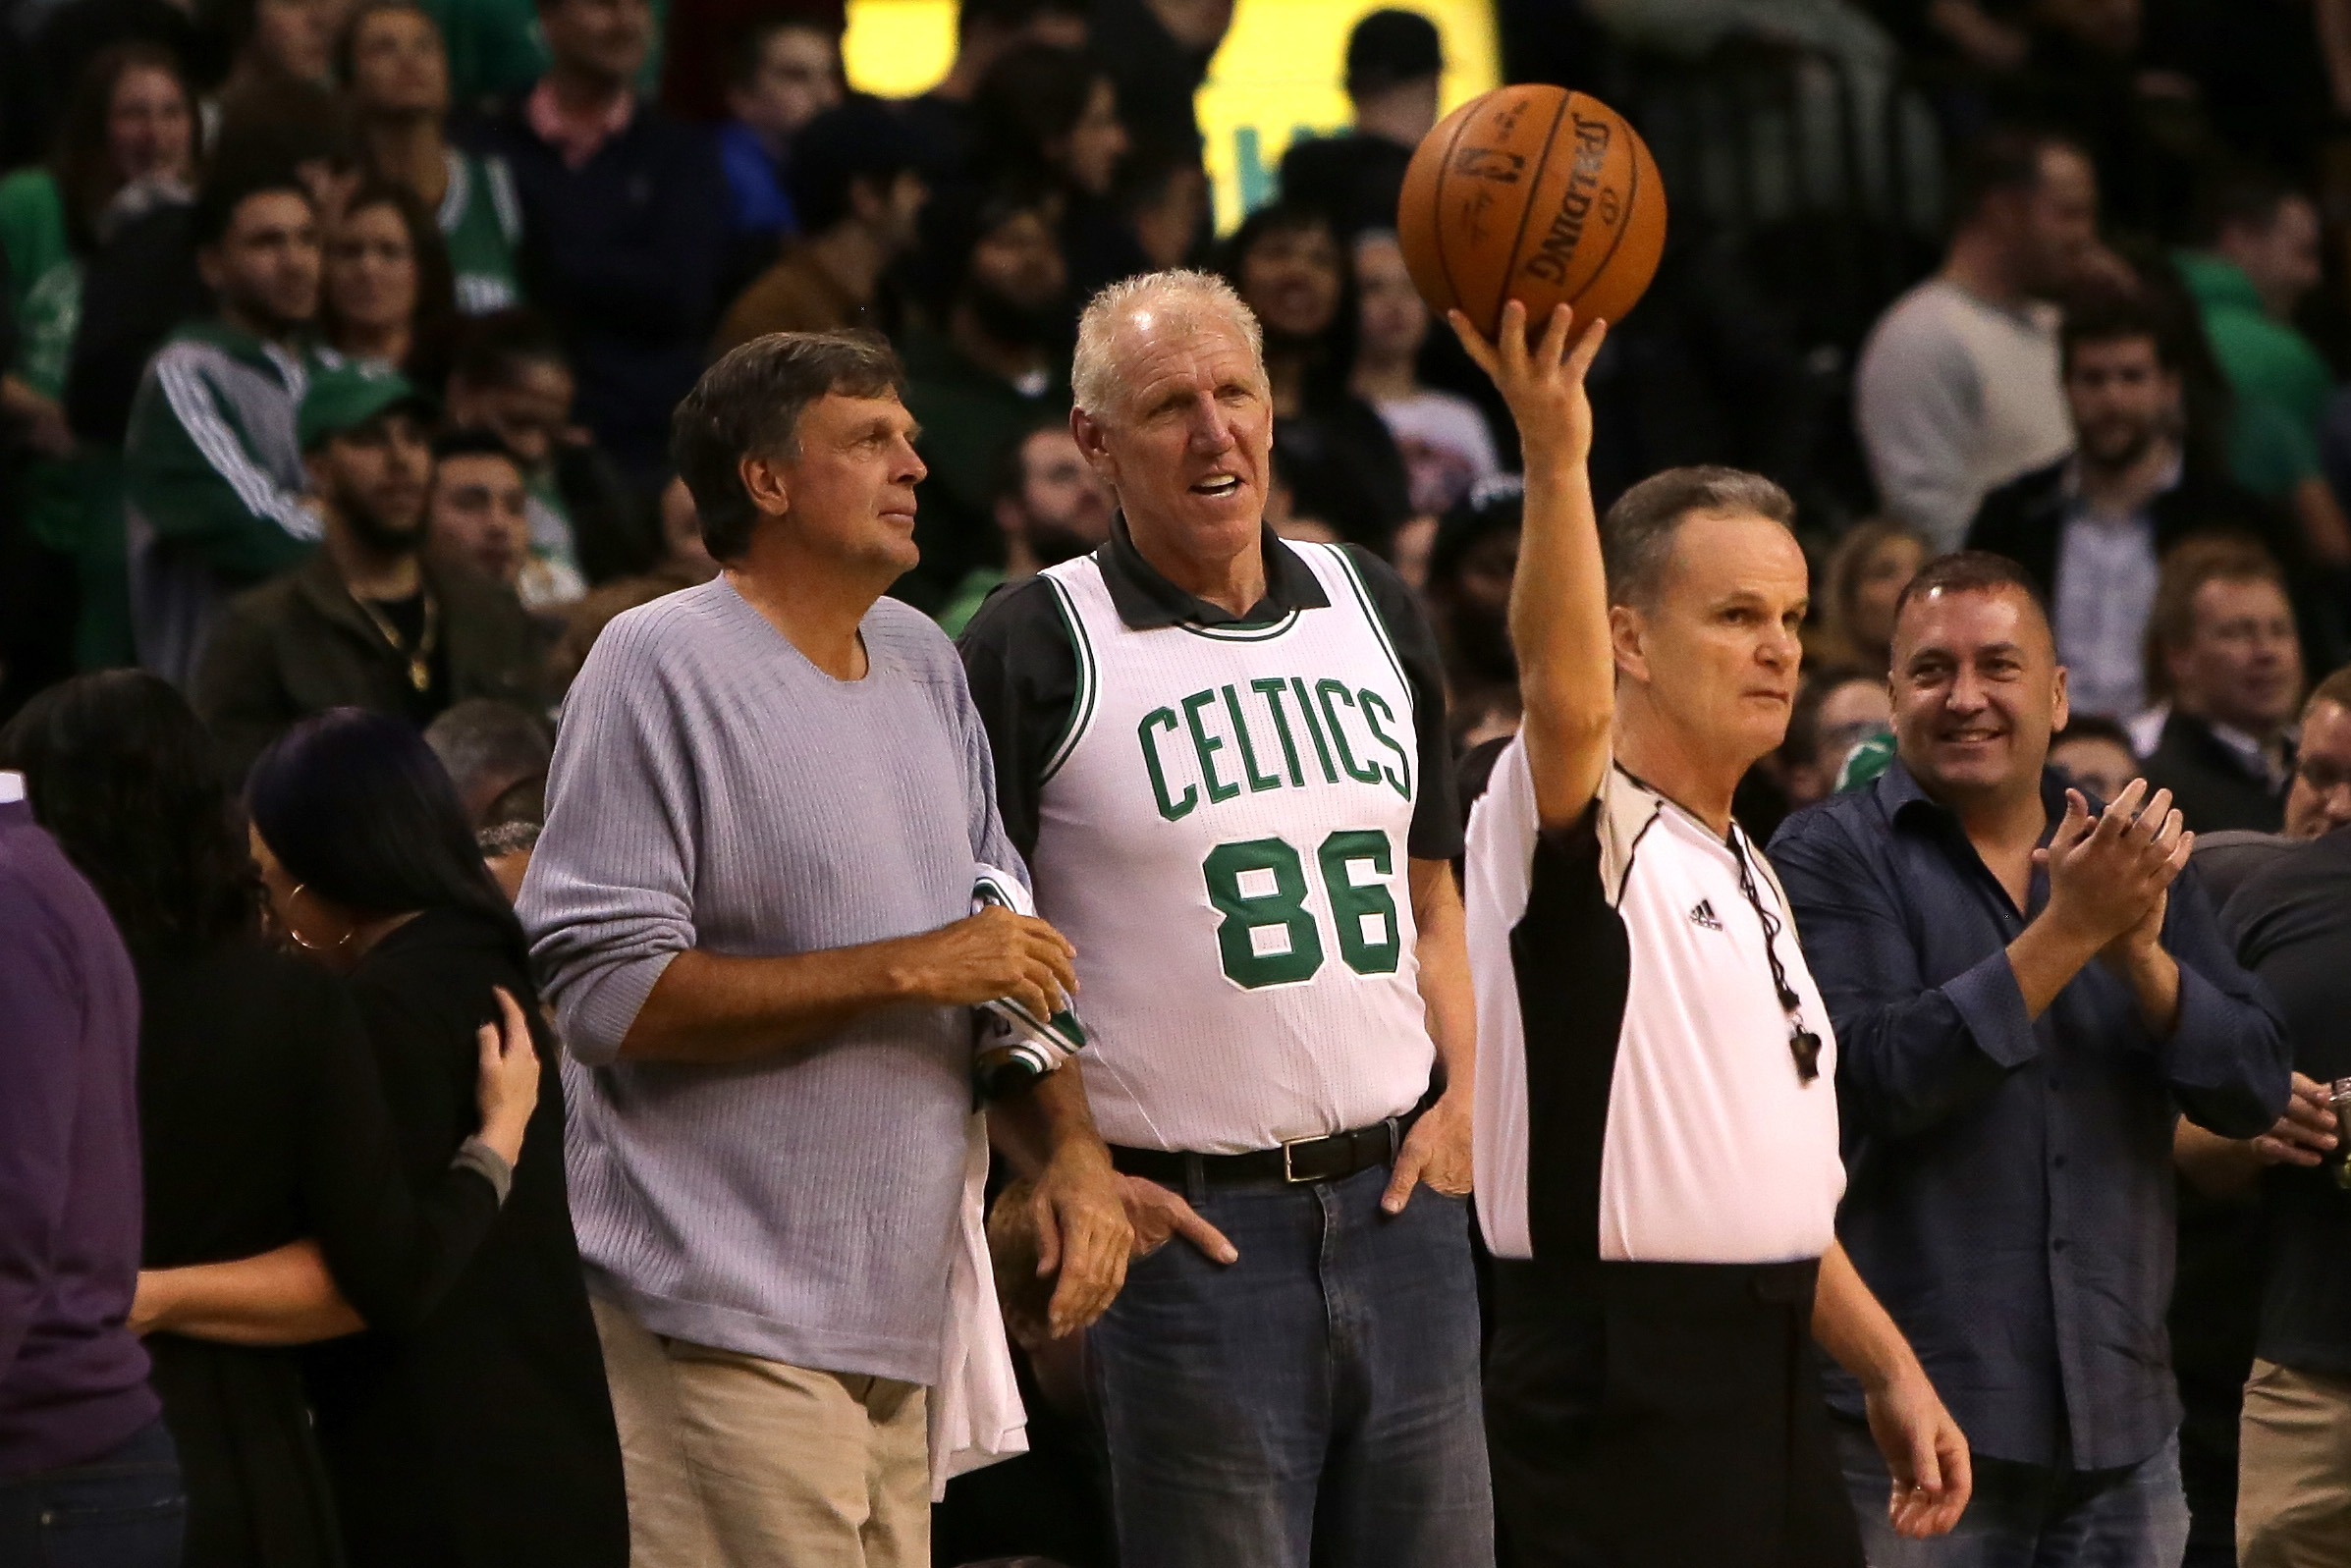 Members of the Boston Celtics 1986 championship team Kevin McHale and Bill Walton look on in the game against the Miami Heat at TD Garden on April 13, 2016, in Boston, Massachusetts.